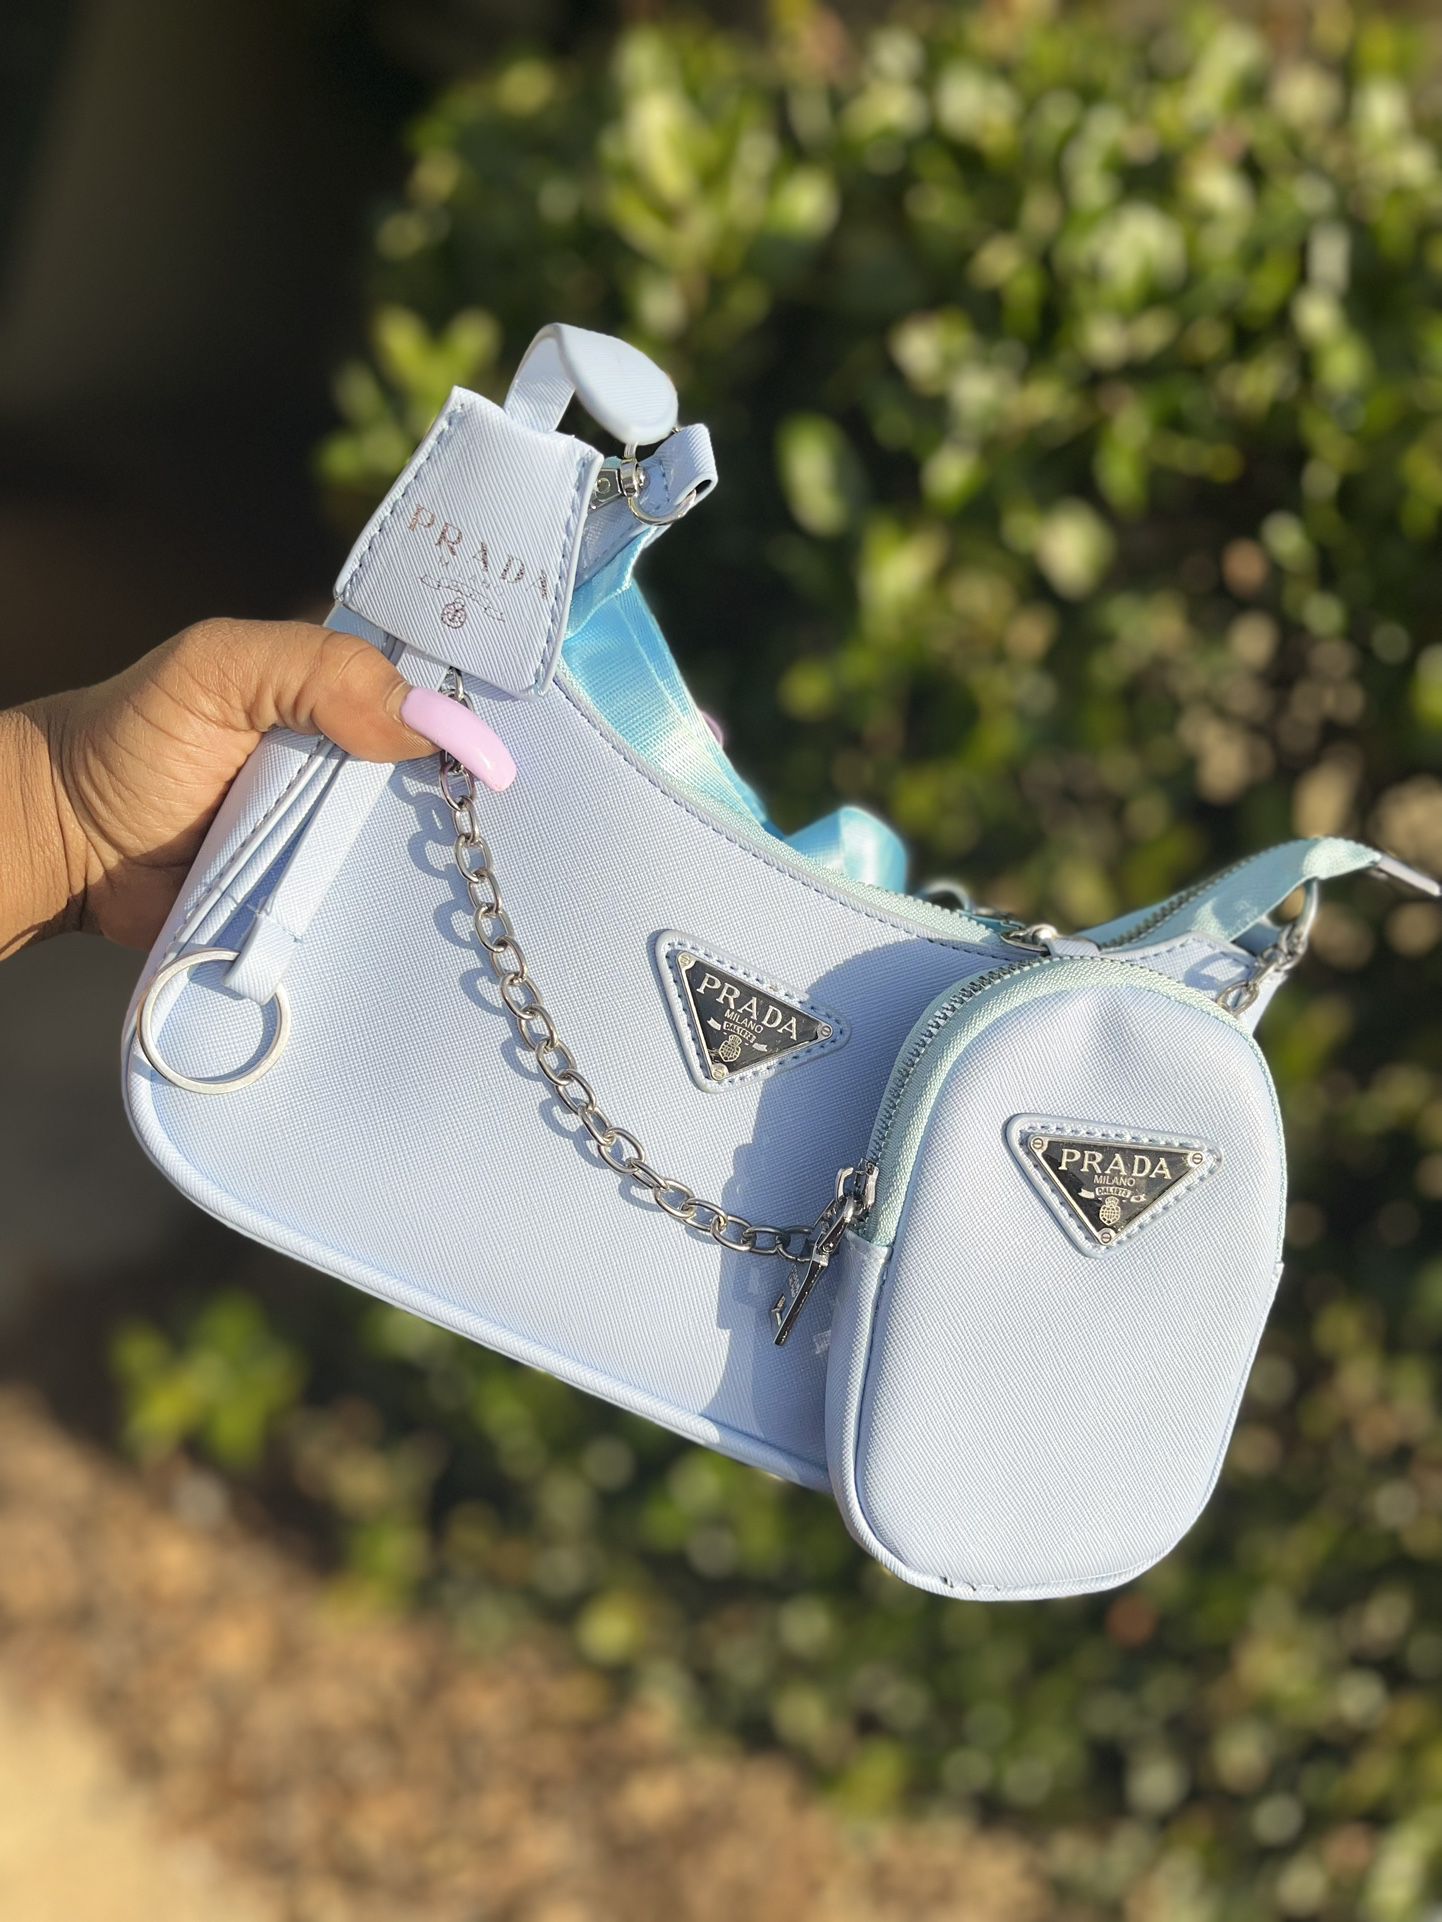 Bag and shoes matching set. Brand new for Sale in Savannah, GA - OfferUp